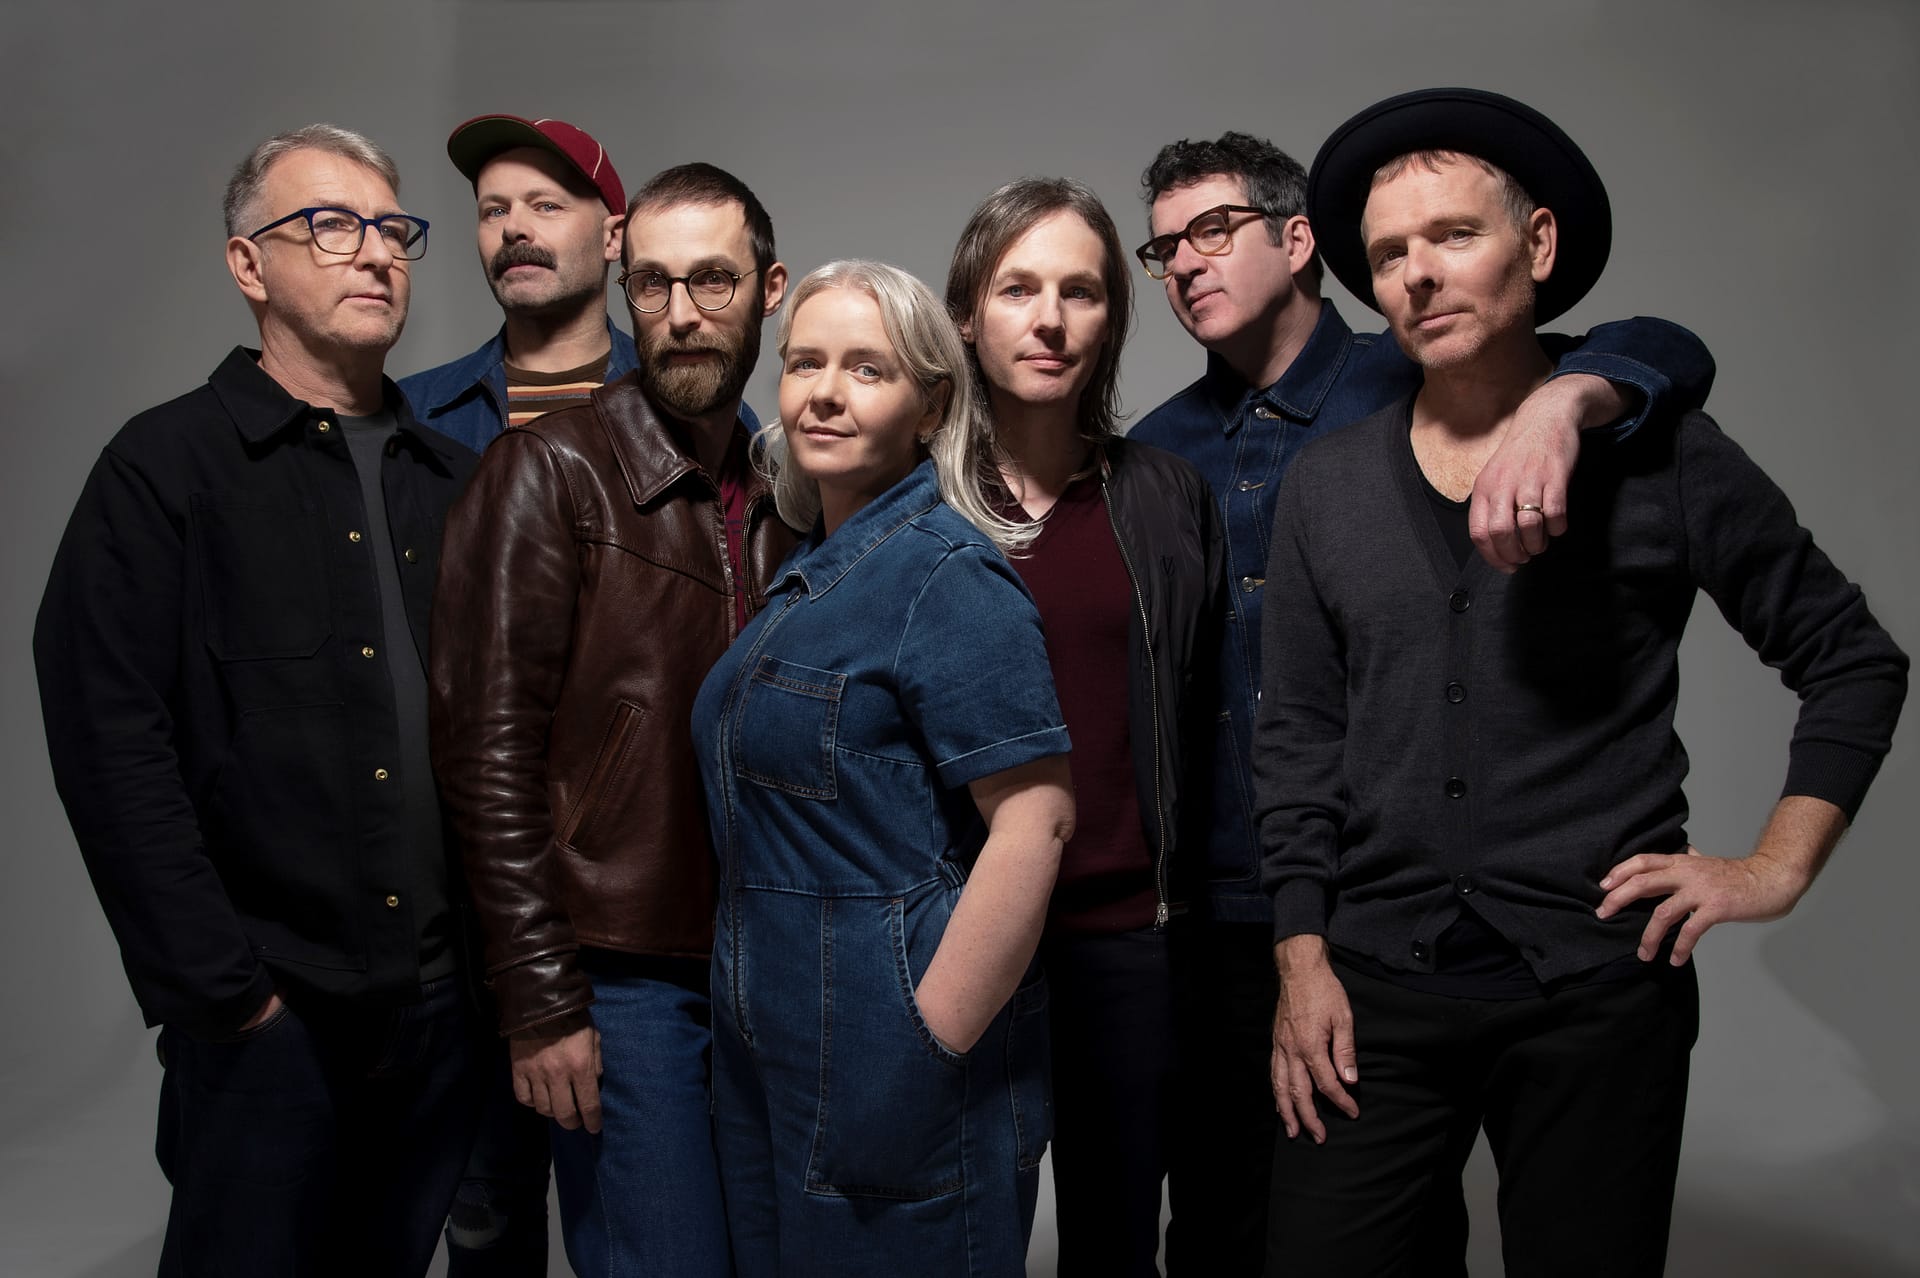 BELLE AND SEBASTIAN Announce Australian Tour With Special Guest BADLY DRAWN BOY